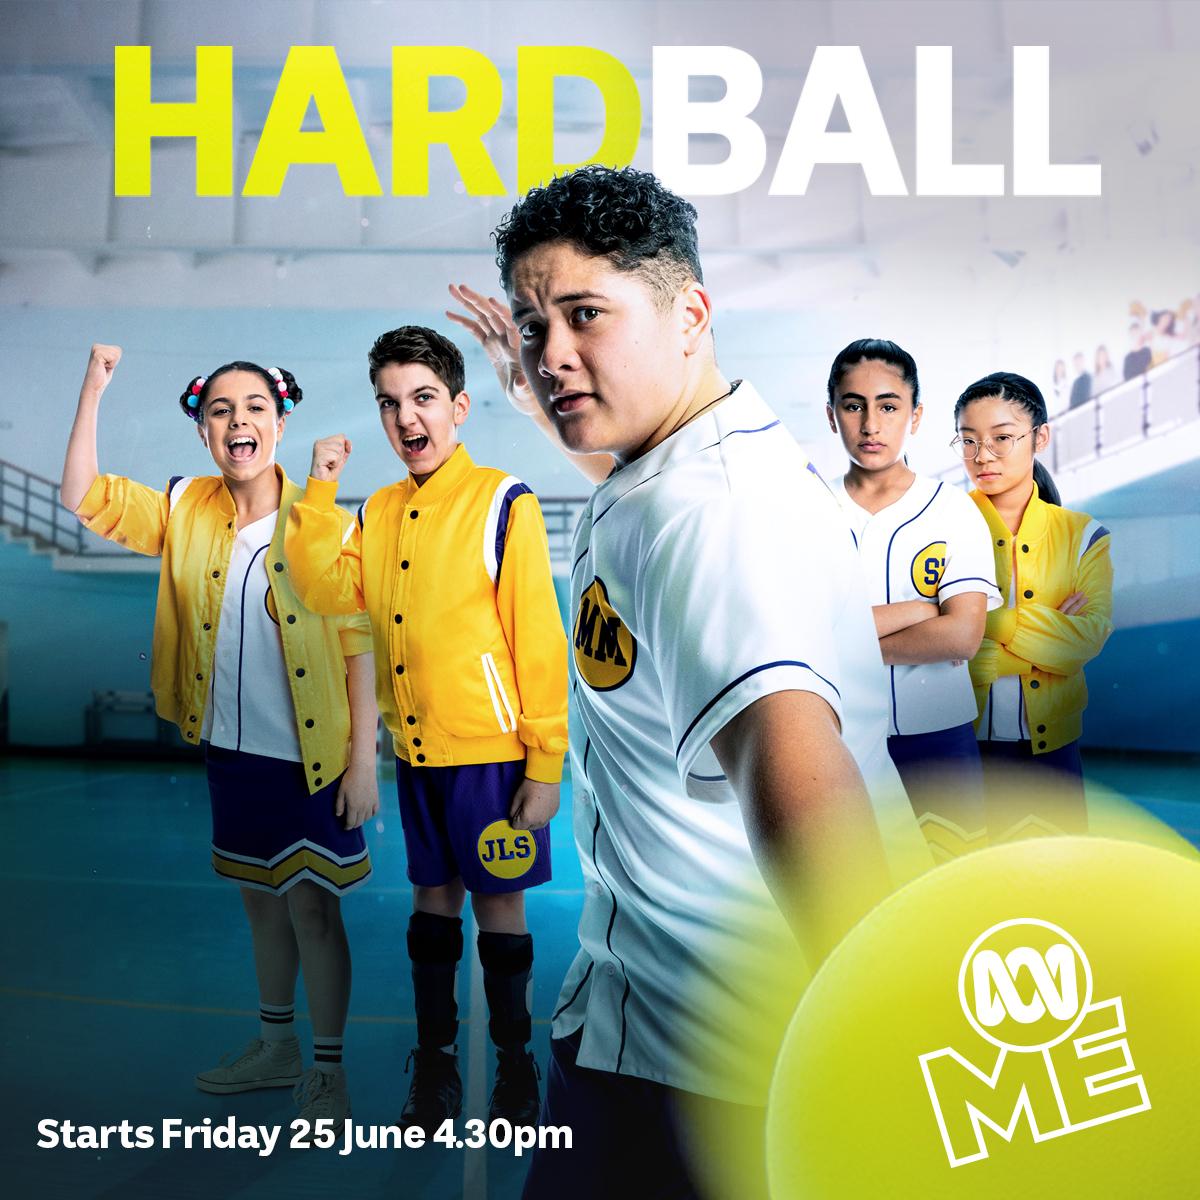 abctv on X: The greatest in the statest 🎾 Can Mikey and the gang win the  doubles handball tournament? Hardball explores the hardship of finishing  primary school, friendships and handball battles. #Hardball 